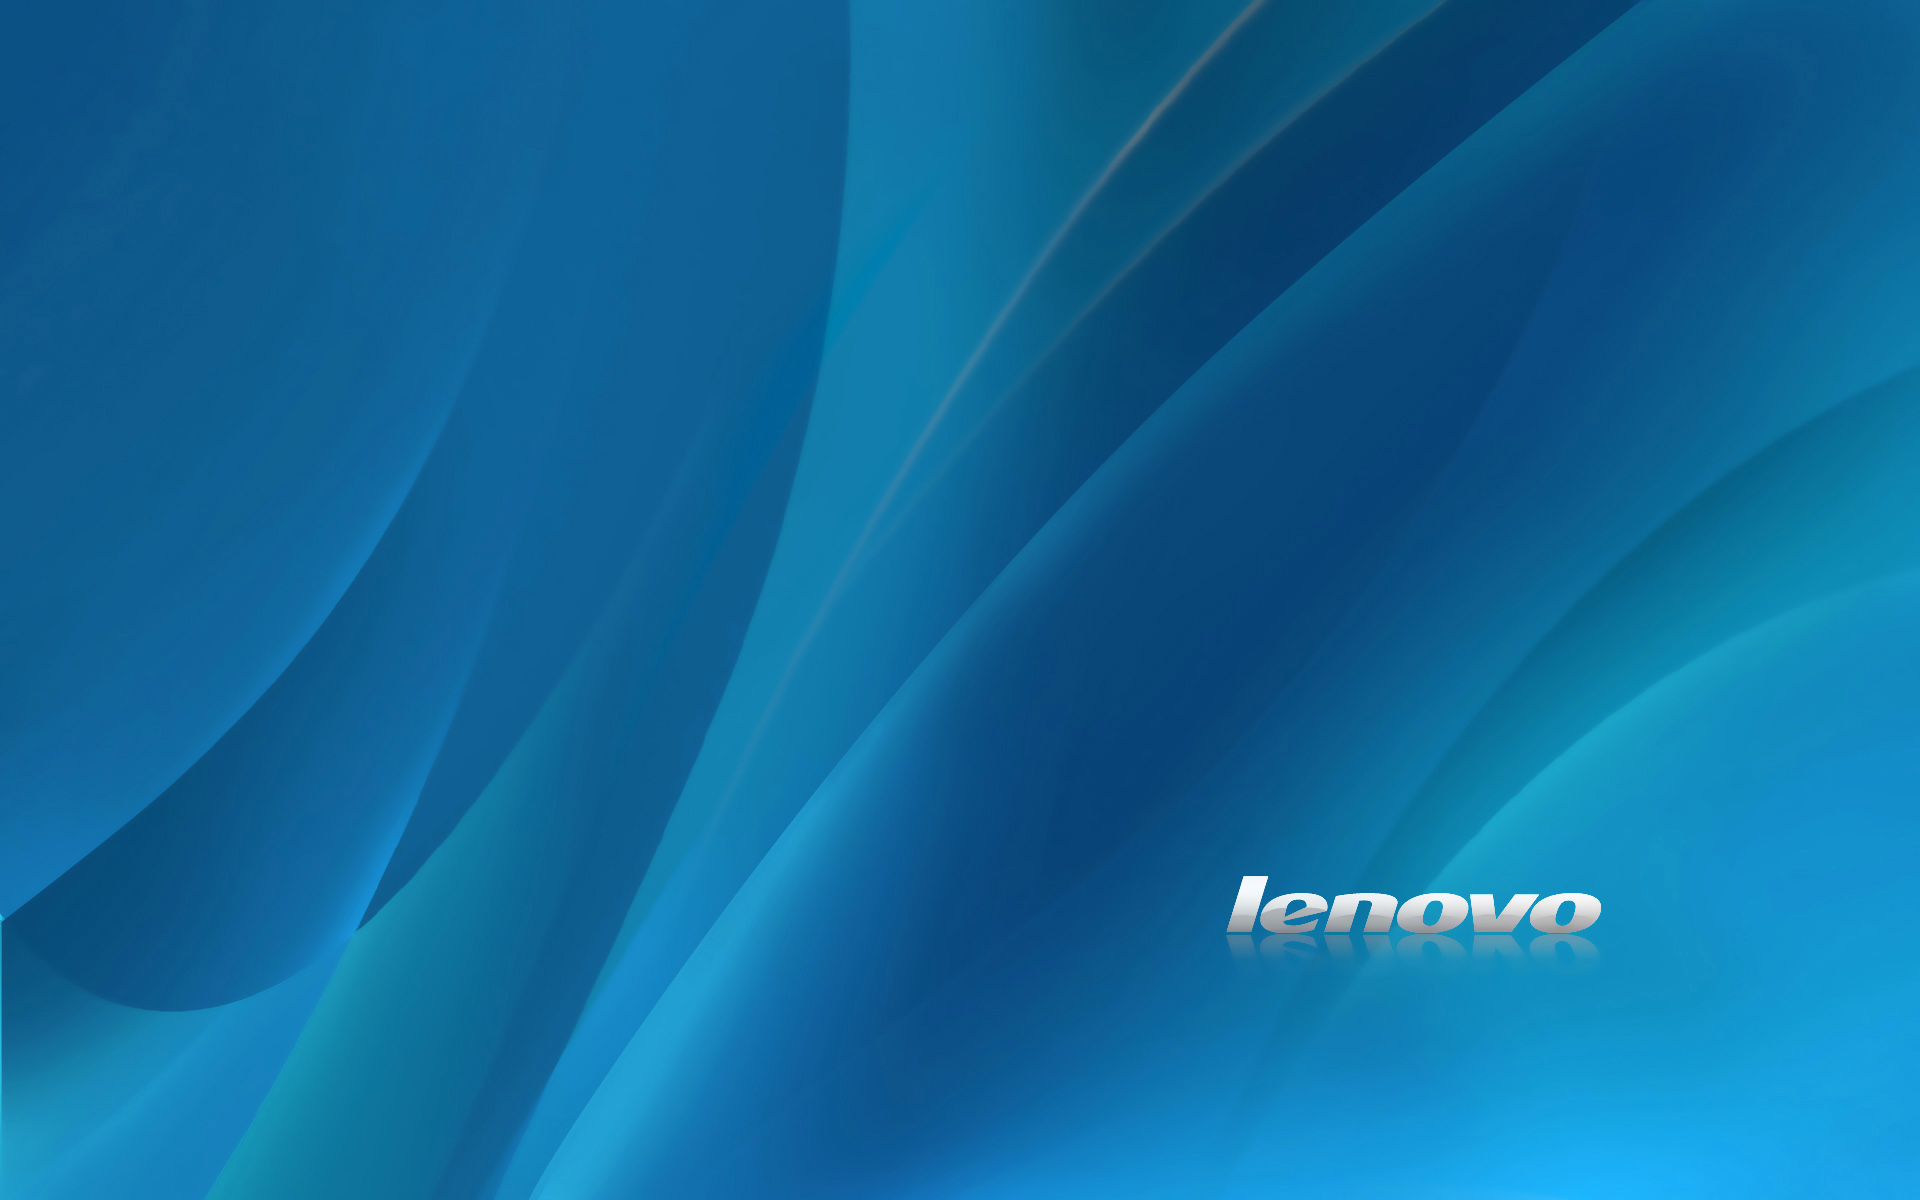 Free Download Lenovo Wallpapers Pc Doctor Ardee 19x10 For Your Desktop Mobile Tablet Explore 50 Lenovo Windows 8 Wallpaper Lenovo Wallpaper Lenovo Yoga Wallpaper Windows 8 Lenovo Wallpaper Windows 7